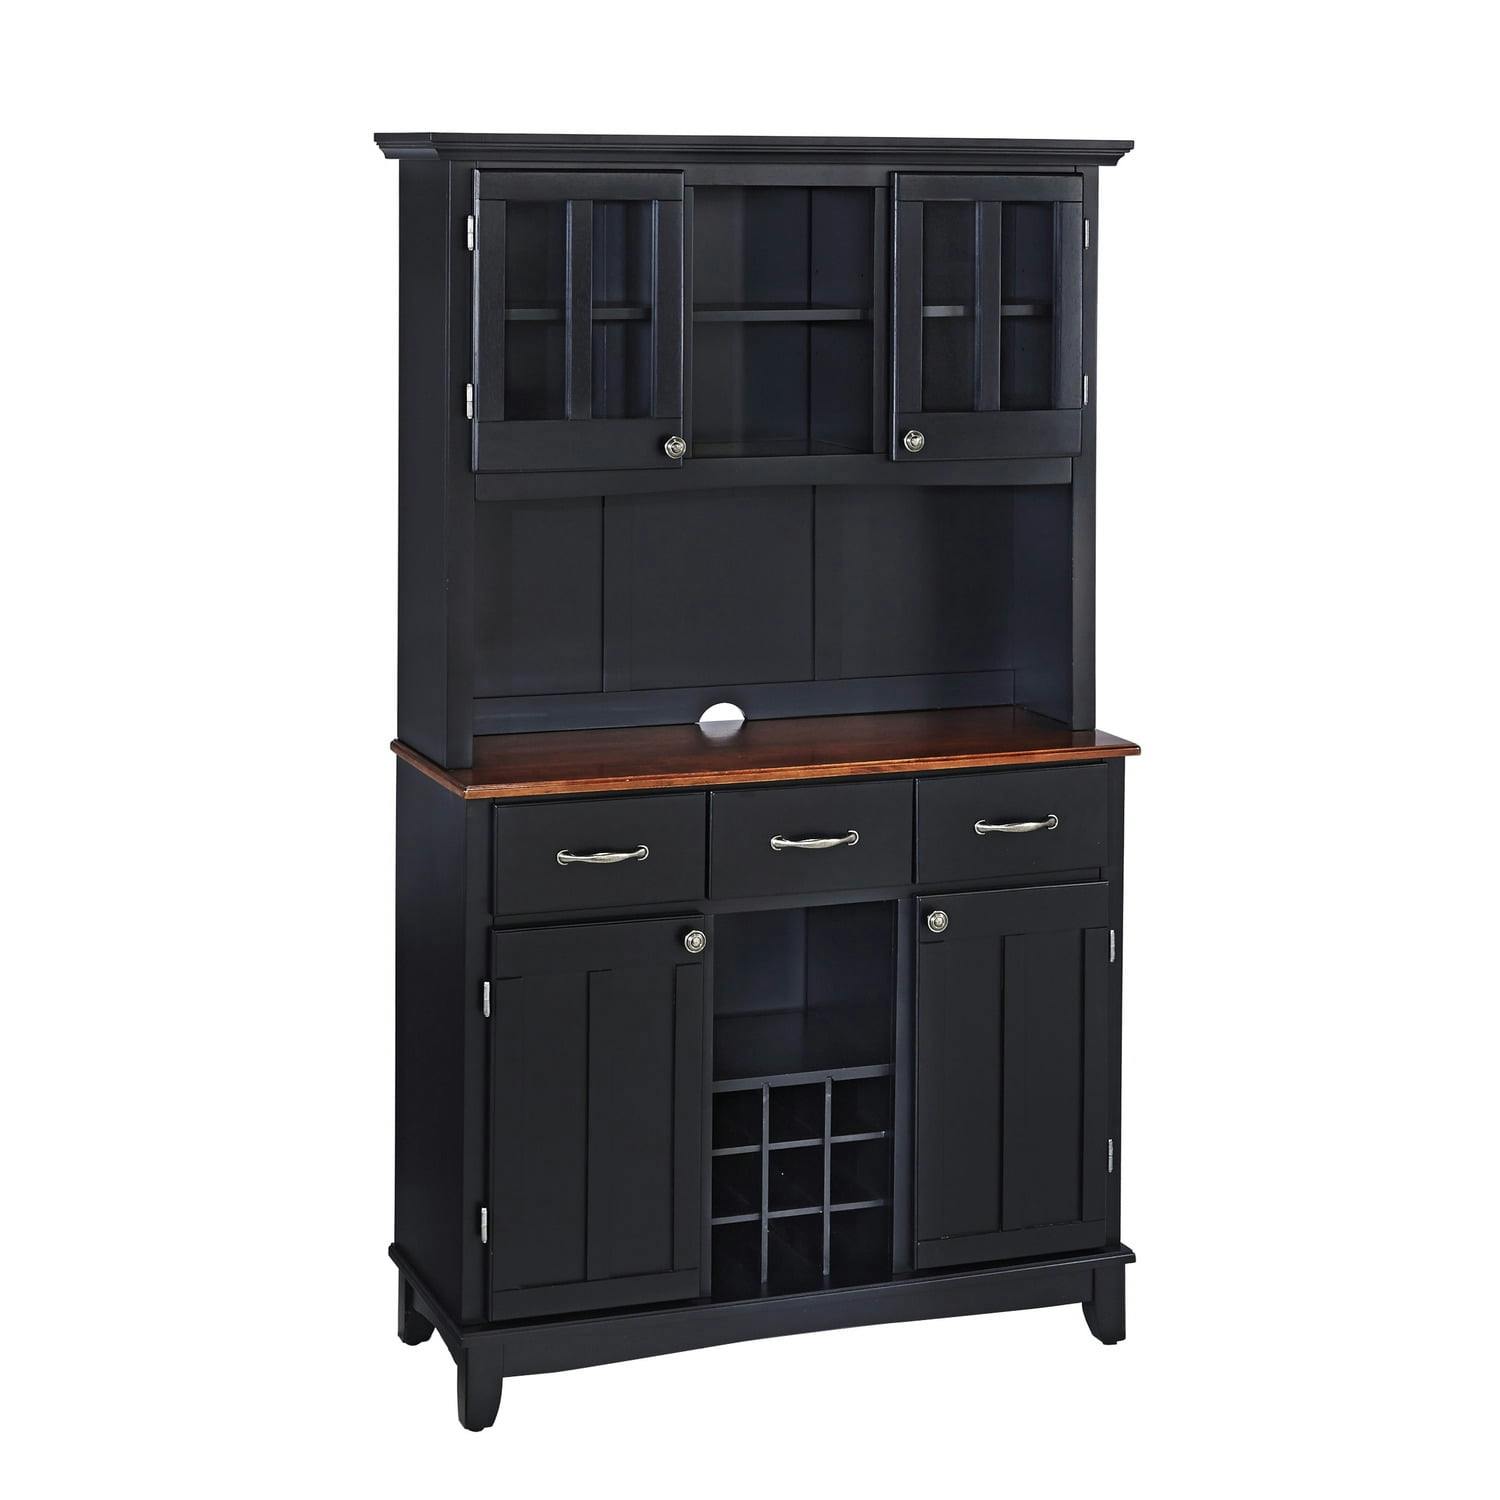 Cherry Top Black Hardwood Buffet Server with Hutch and Wine Rack